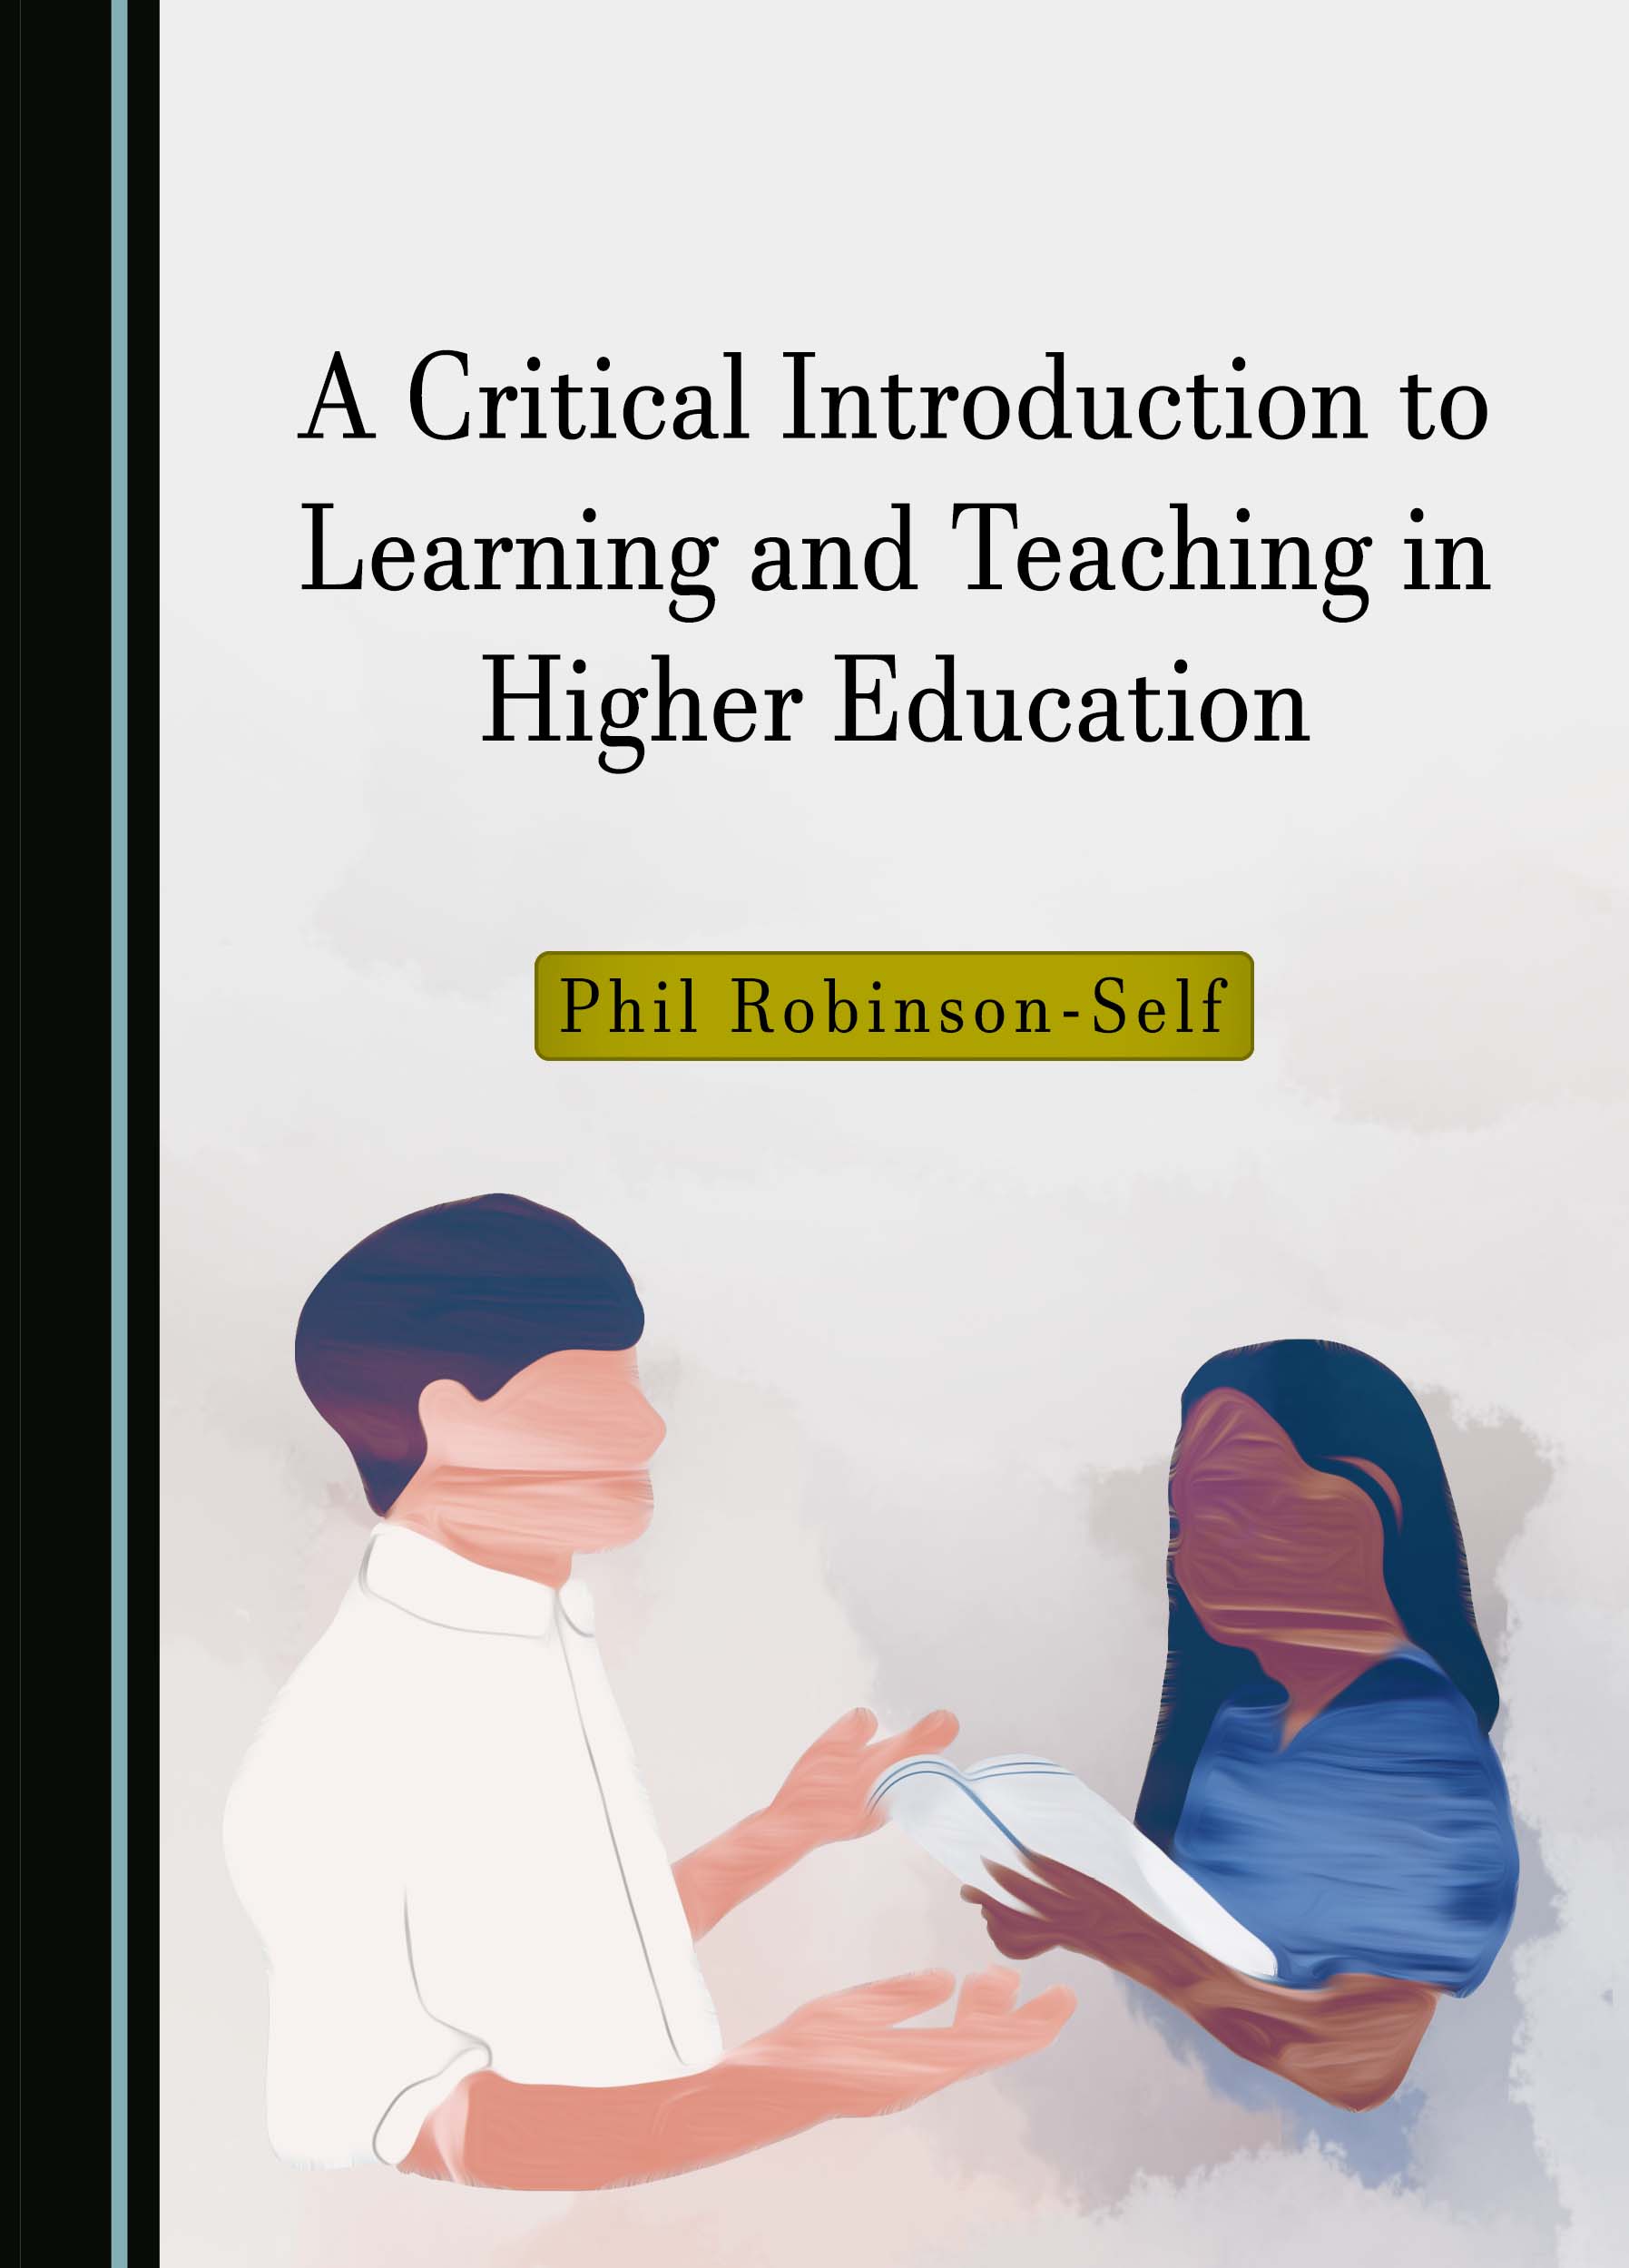 A Critical Introduction to Learning and Teaching in Higher Education